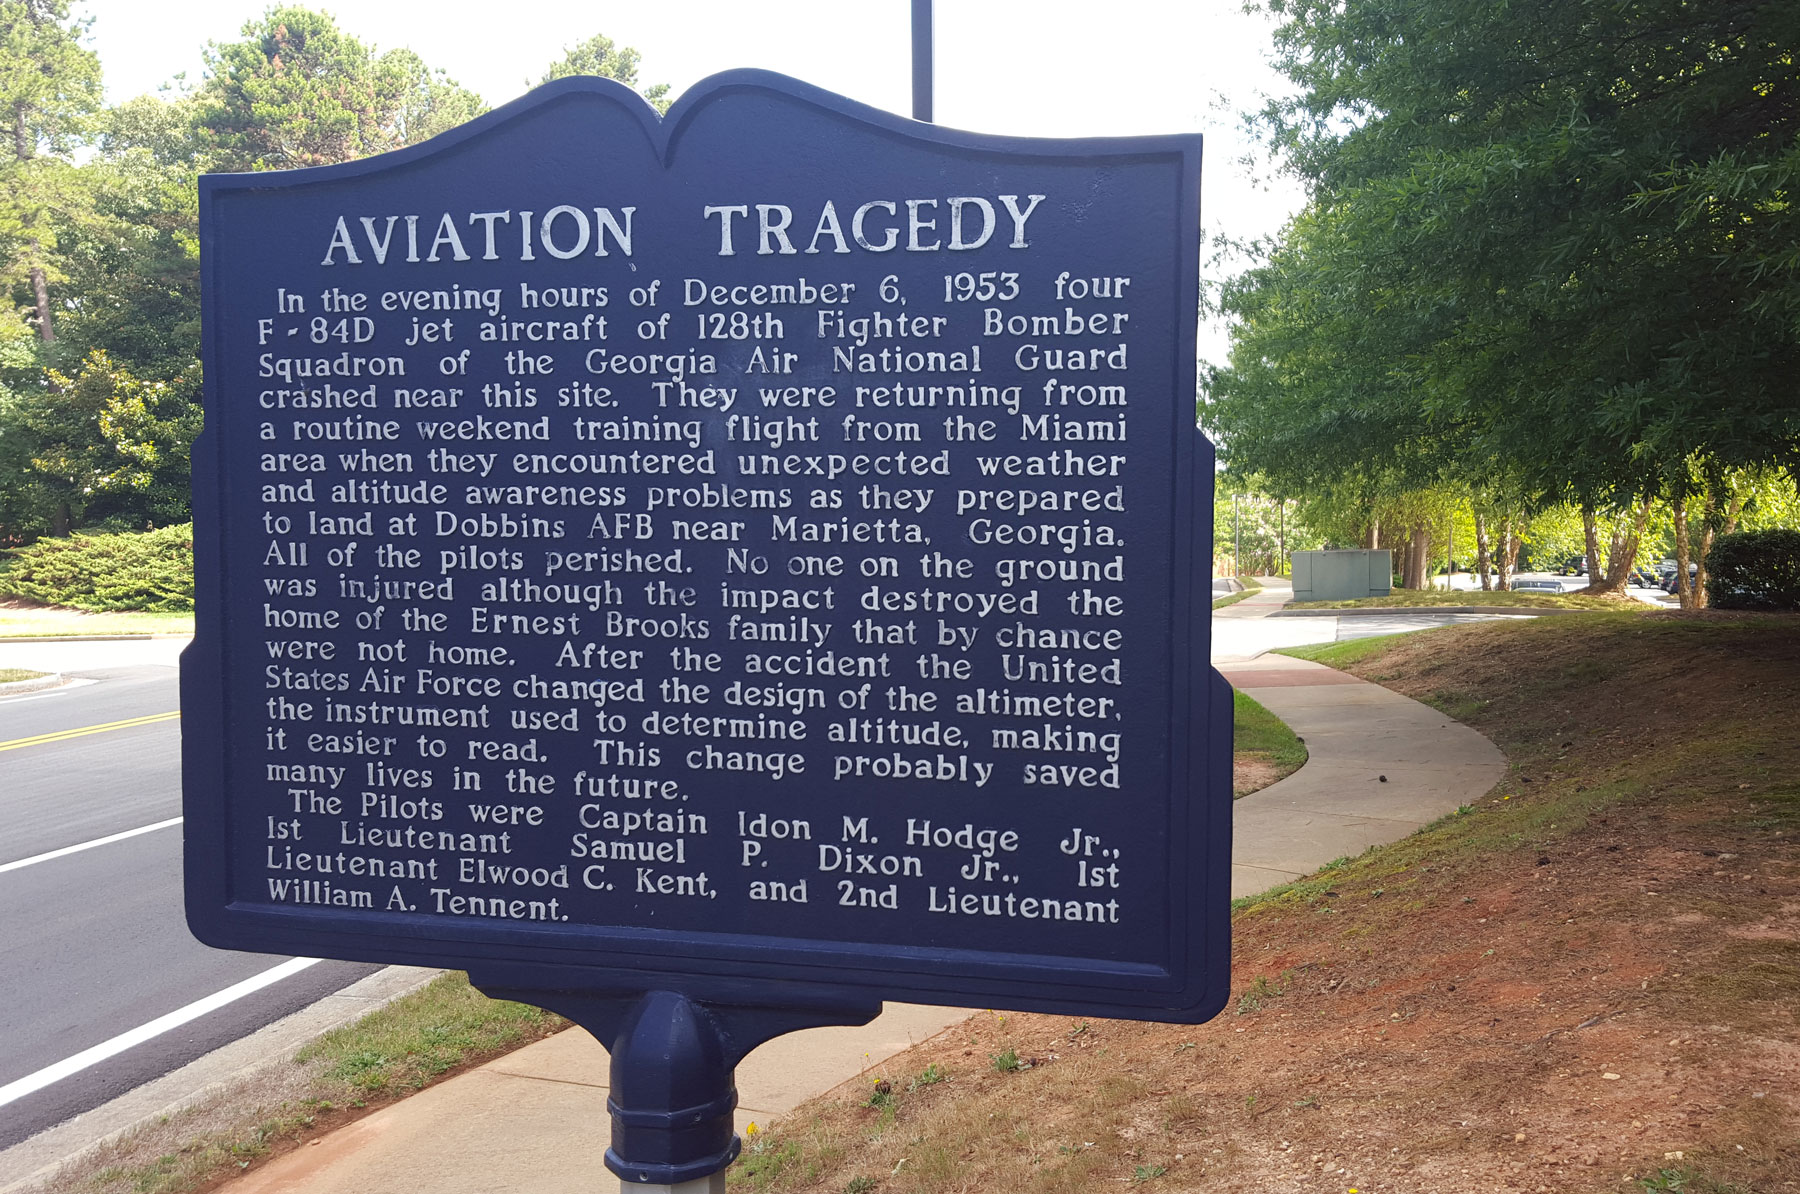 An avaition tragedy near Georgia Campus - Philadelphia College of Osteopathic Medicine prompted the United States Air Force to redesign aircraft altimeters.